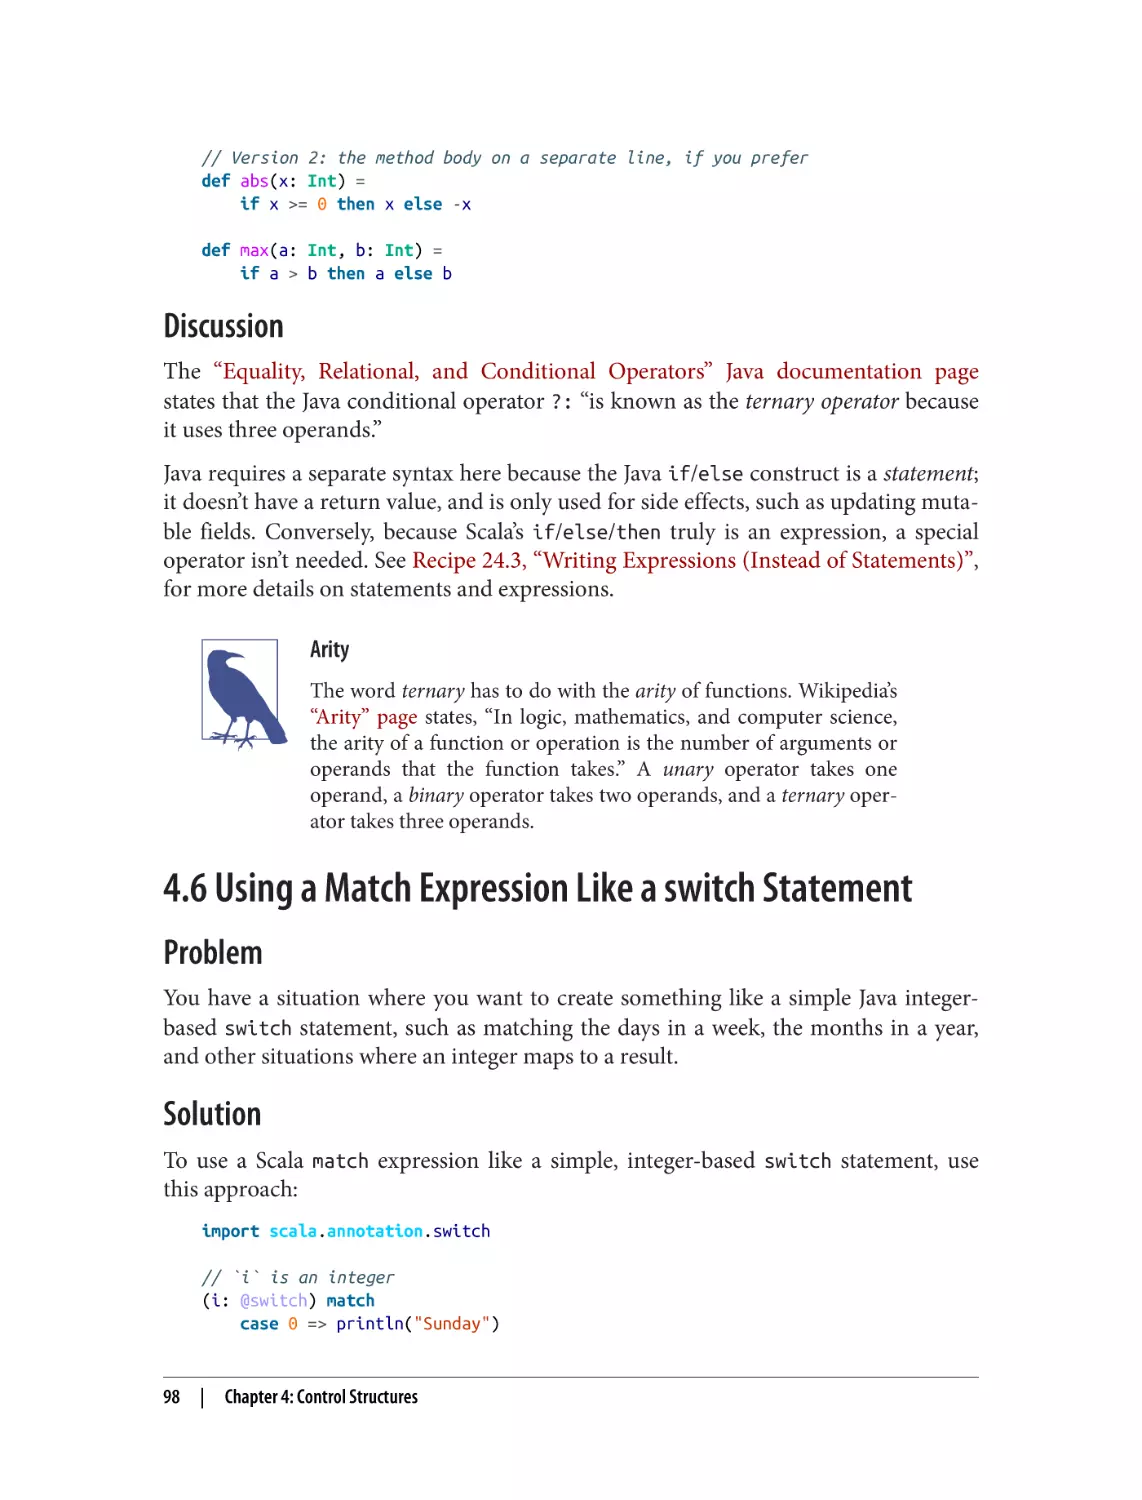 Discussion
4.6 Using a Match Expression Like a switch Statement
Problem
Solution